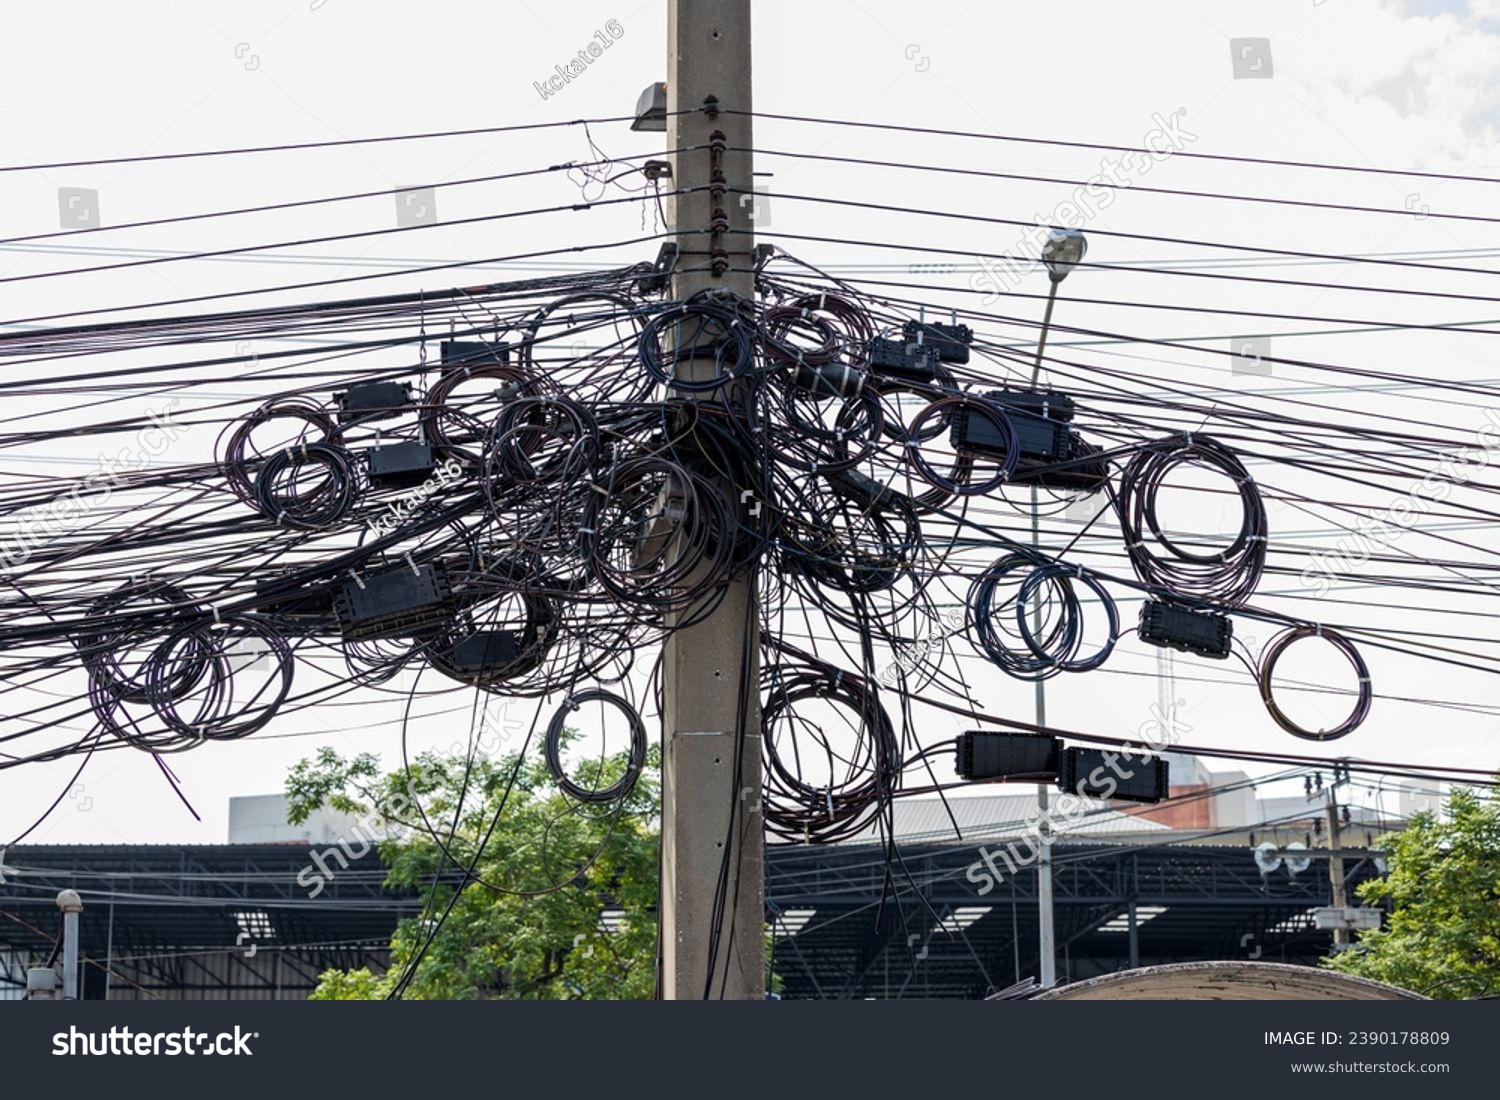 Intertwined electric wires. A tangled electrical wires showcasing the complexities of the city's power supply system. telephone wires and wireless provider cables. #2390178809